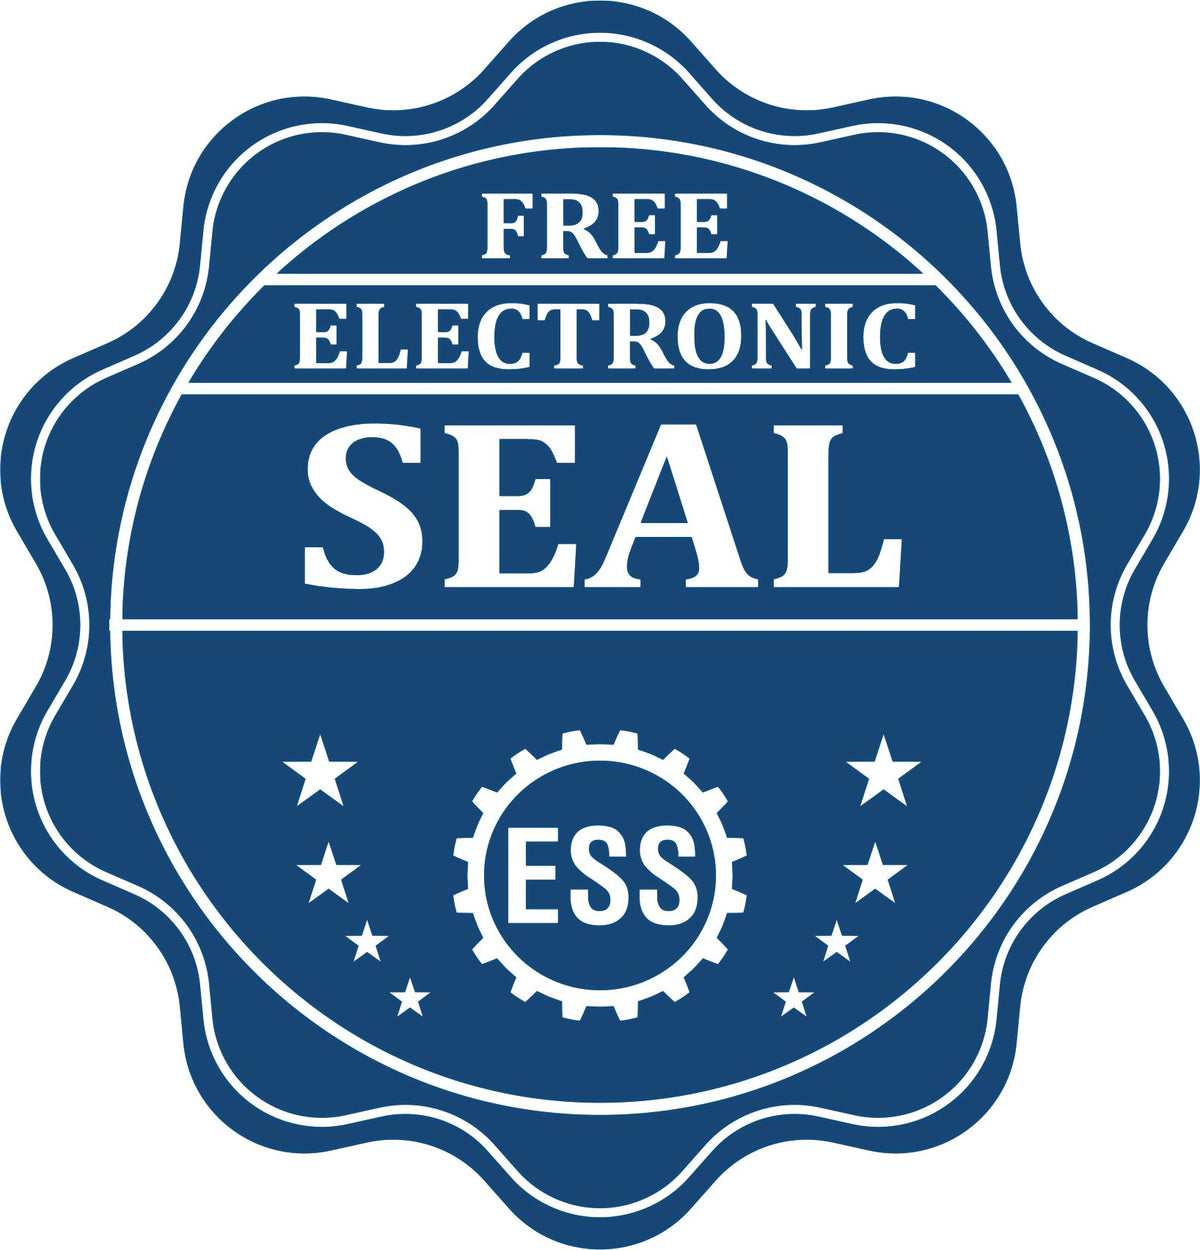 A badge showing a free electronic seal for the Heavy Duty Cast Iron Pennsylvania Engineer Seal Embosser with stars and the ESS gear on the emblem.